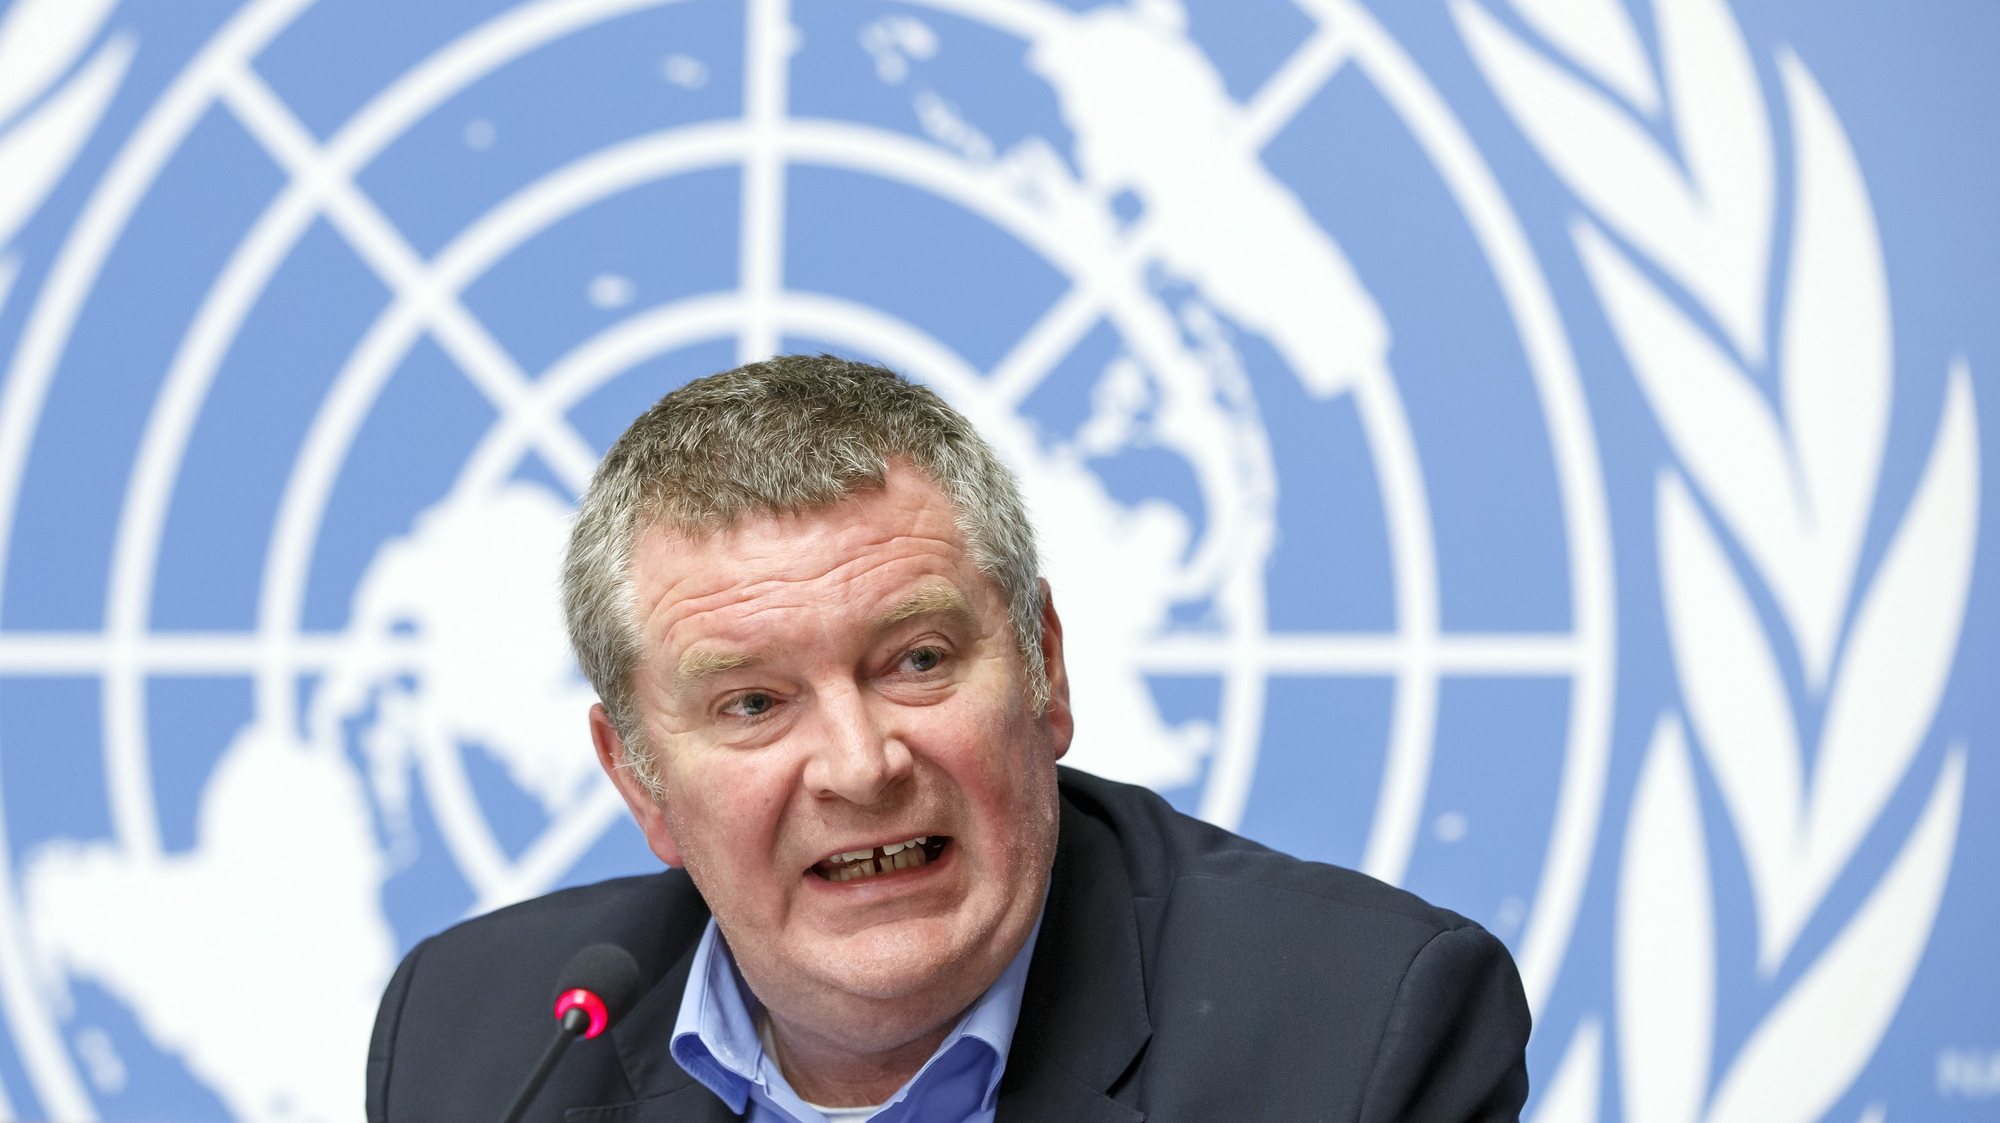 epa07335506 Mike Ryan, Assistant Director-General for Emergencies of World Health Organization (WHO), informs to the media about of update on WHO Ebola operations in the Democratic Republic of the Congo (DRC) during a press conference, at the European headquarters of the United Nations (UNOG) in Geneva, Switzerland, 01 February 2019.  EPA/SALVATORE DI NOLFI